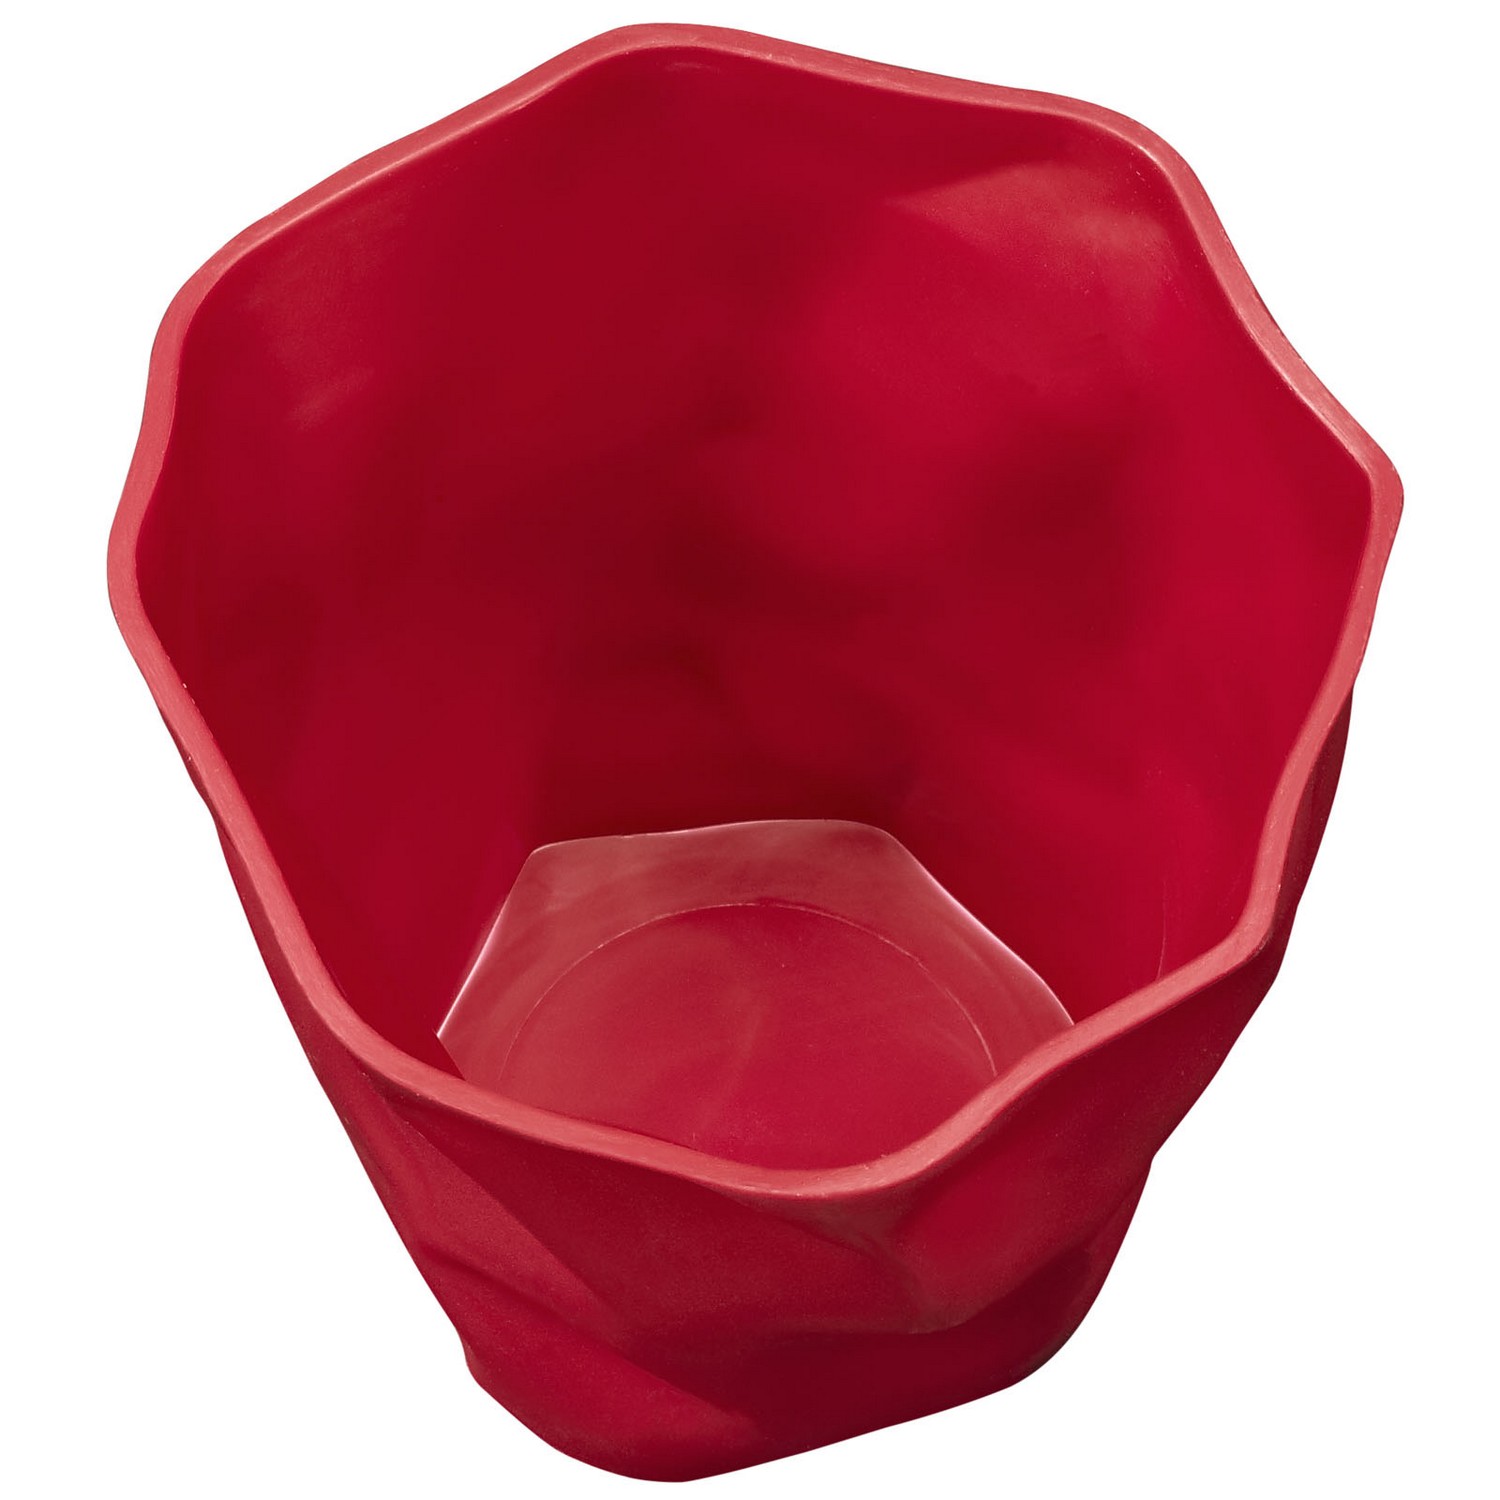 Modway Lava Pencil Holder - Red